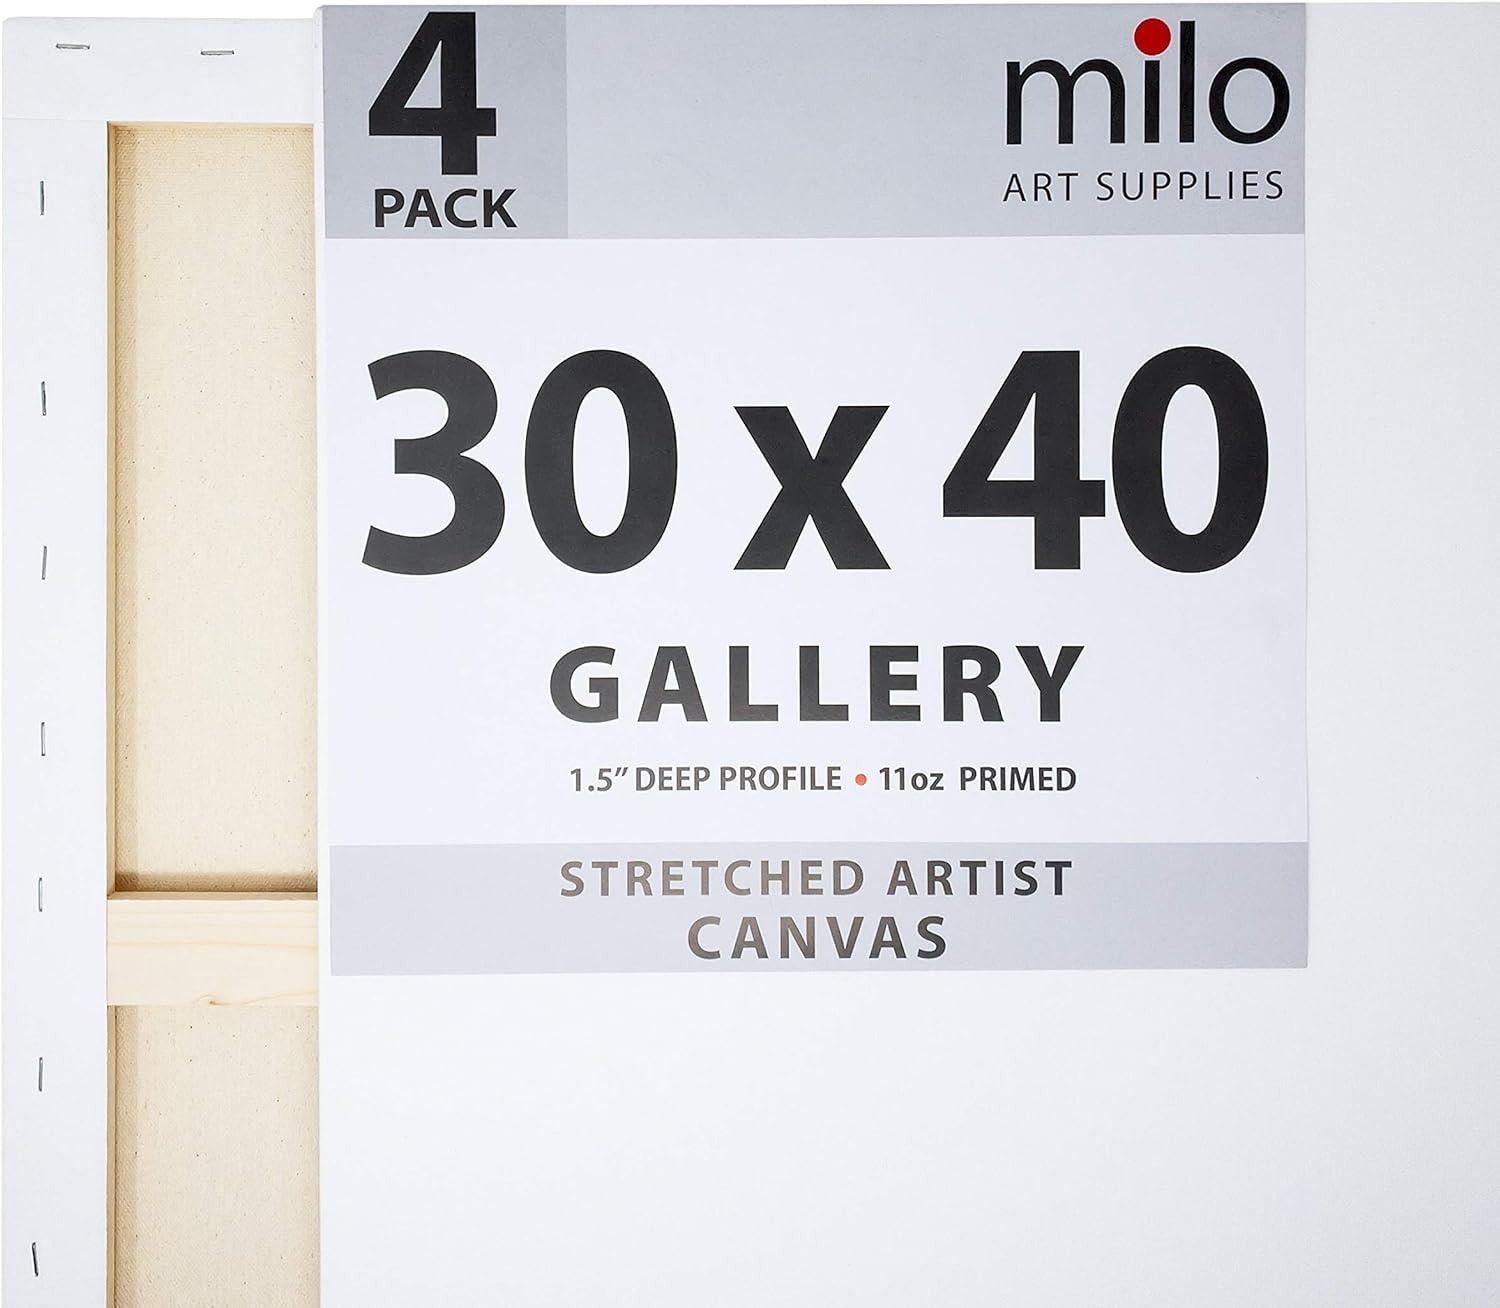 milo Stretched Artist Canvas 48x60 inches 2 Pack 1.5 inch Thick Gallery  Profile 15 oz Primed Large Canvases for Painting, Ready to Paint Art  Supplies for Acrylic, Oil - Amazing Bargains USA - Buffalo, NY